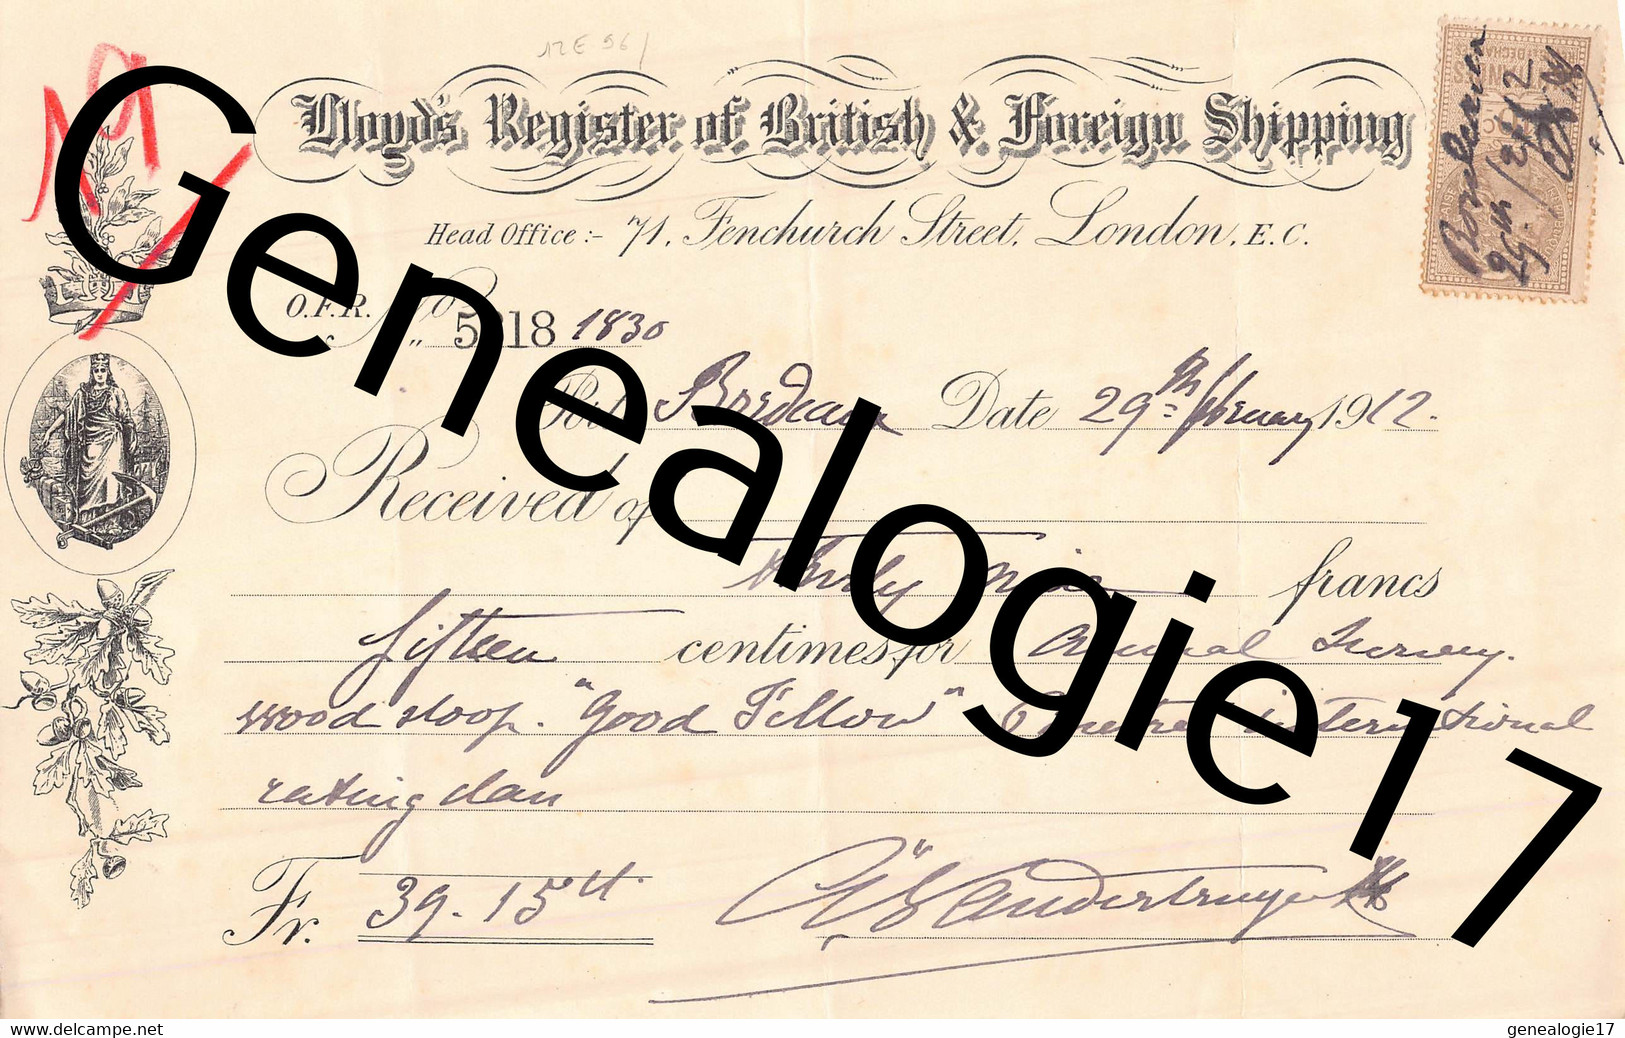 96 2765 ANGLETERRE ENGLAND LONDON LONDRES 1912 Mods Register Of British Foreign Shipping - Royaume-Uni